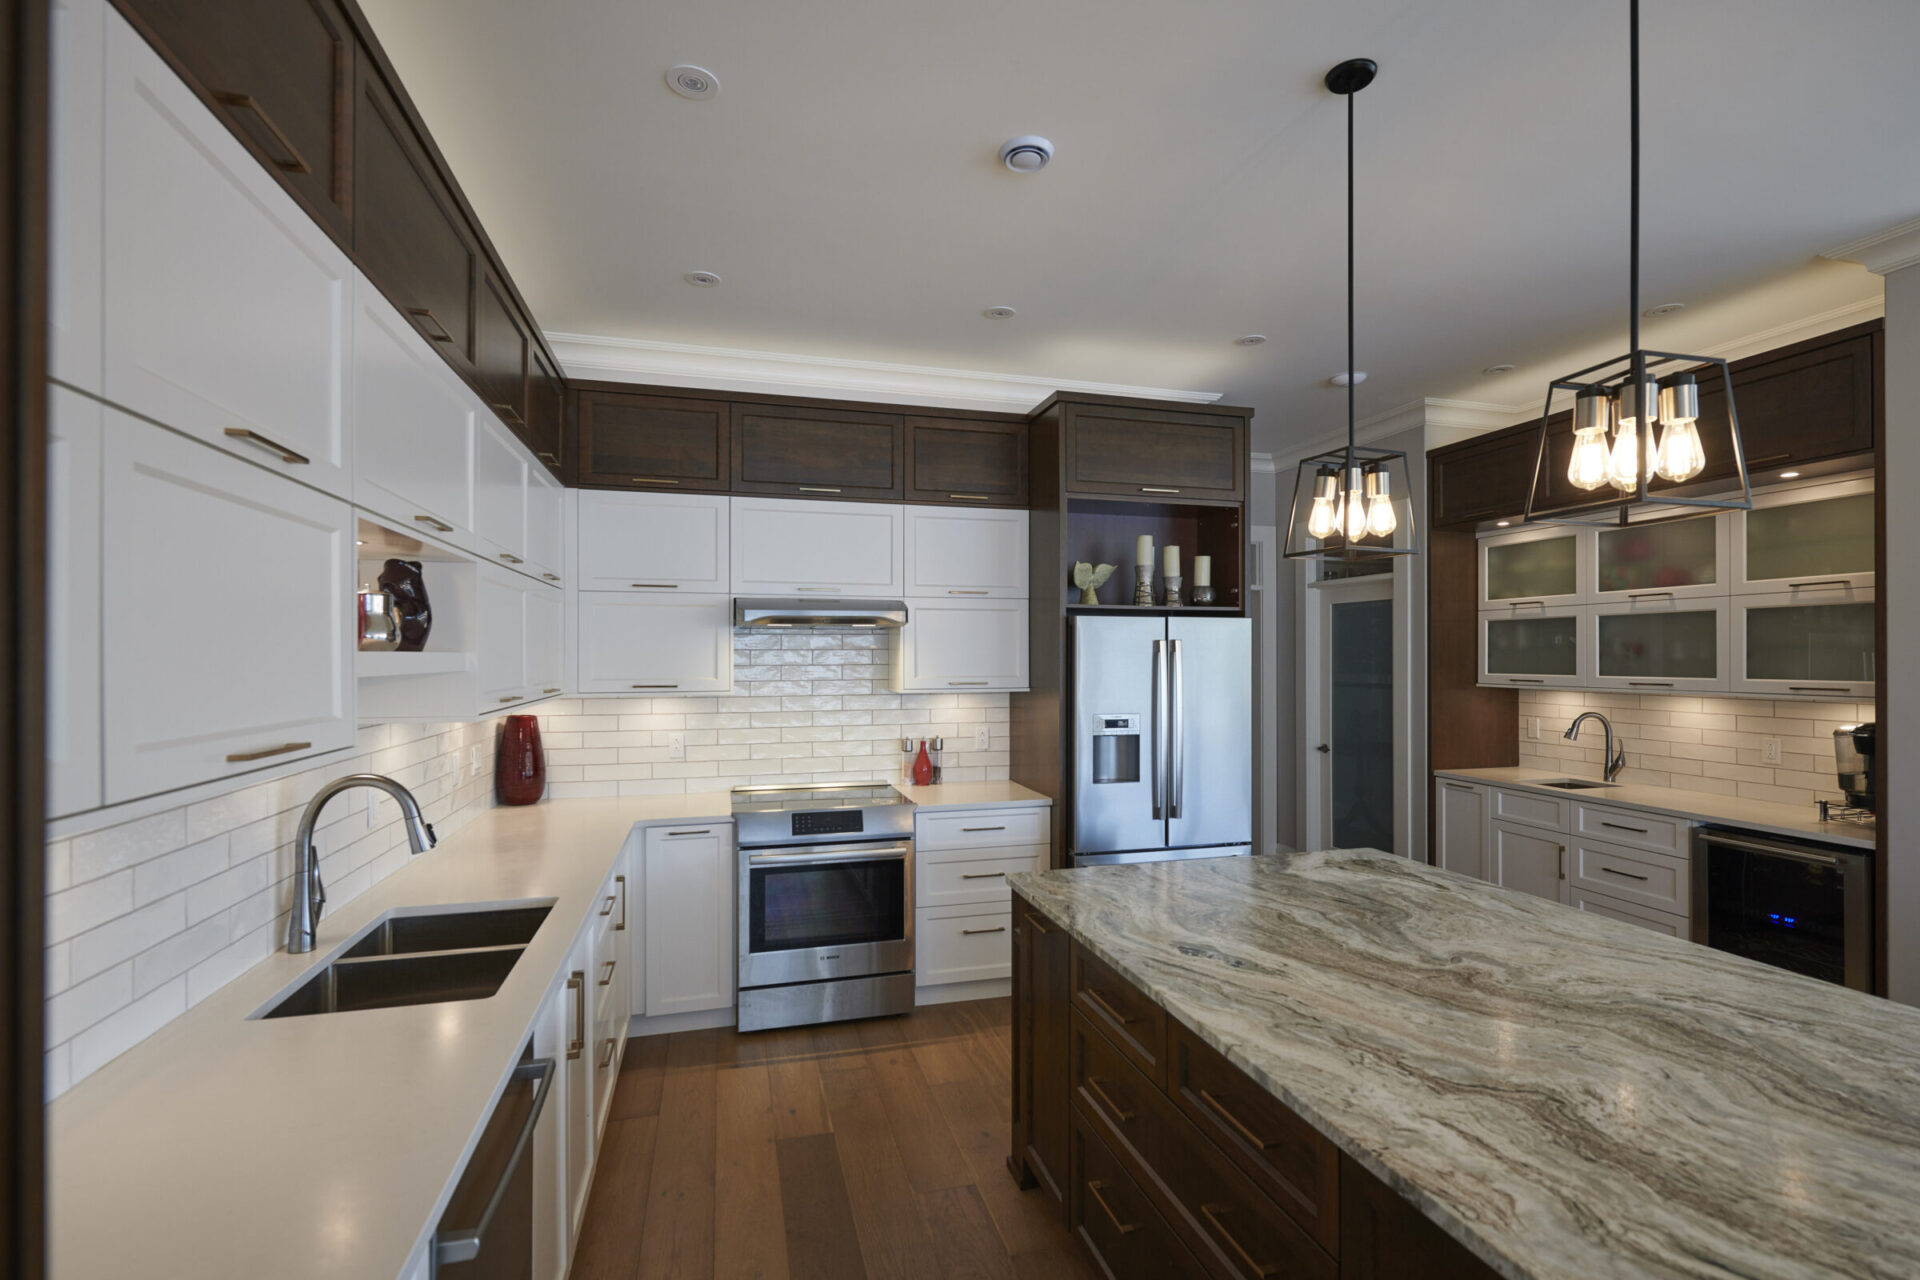 Modern kitchen interior with white cabinetry, dark countertops, stainless steel appliances, hardwood floors, and pendant lighting over an island.